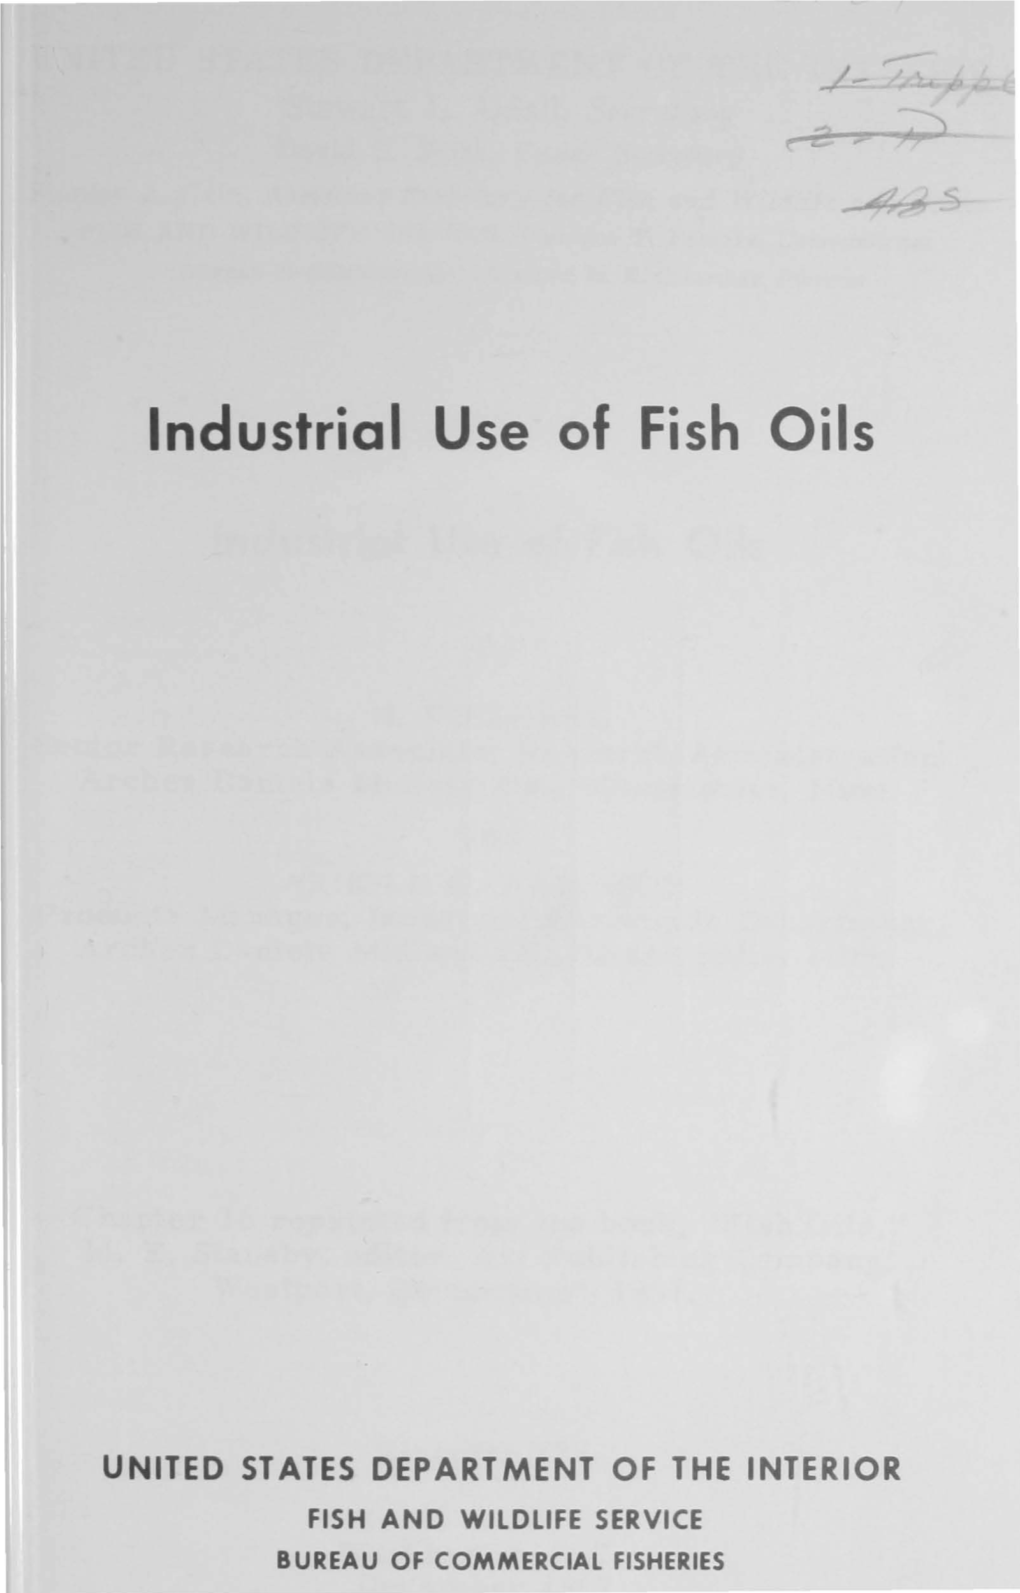 Industrial Use of Fish Oils